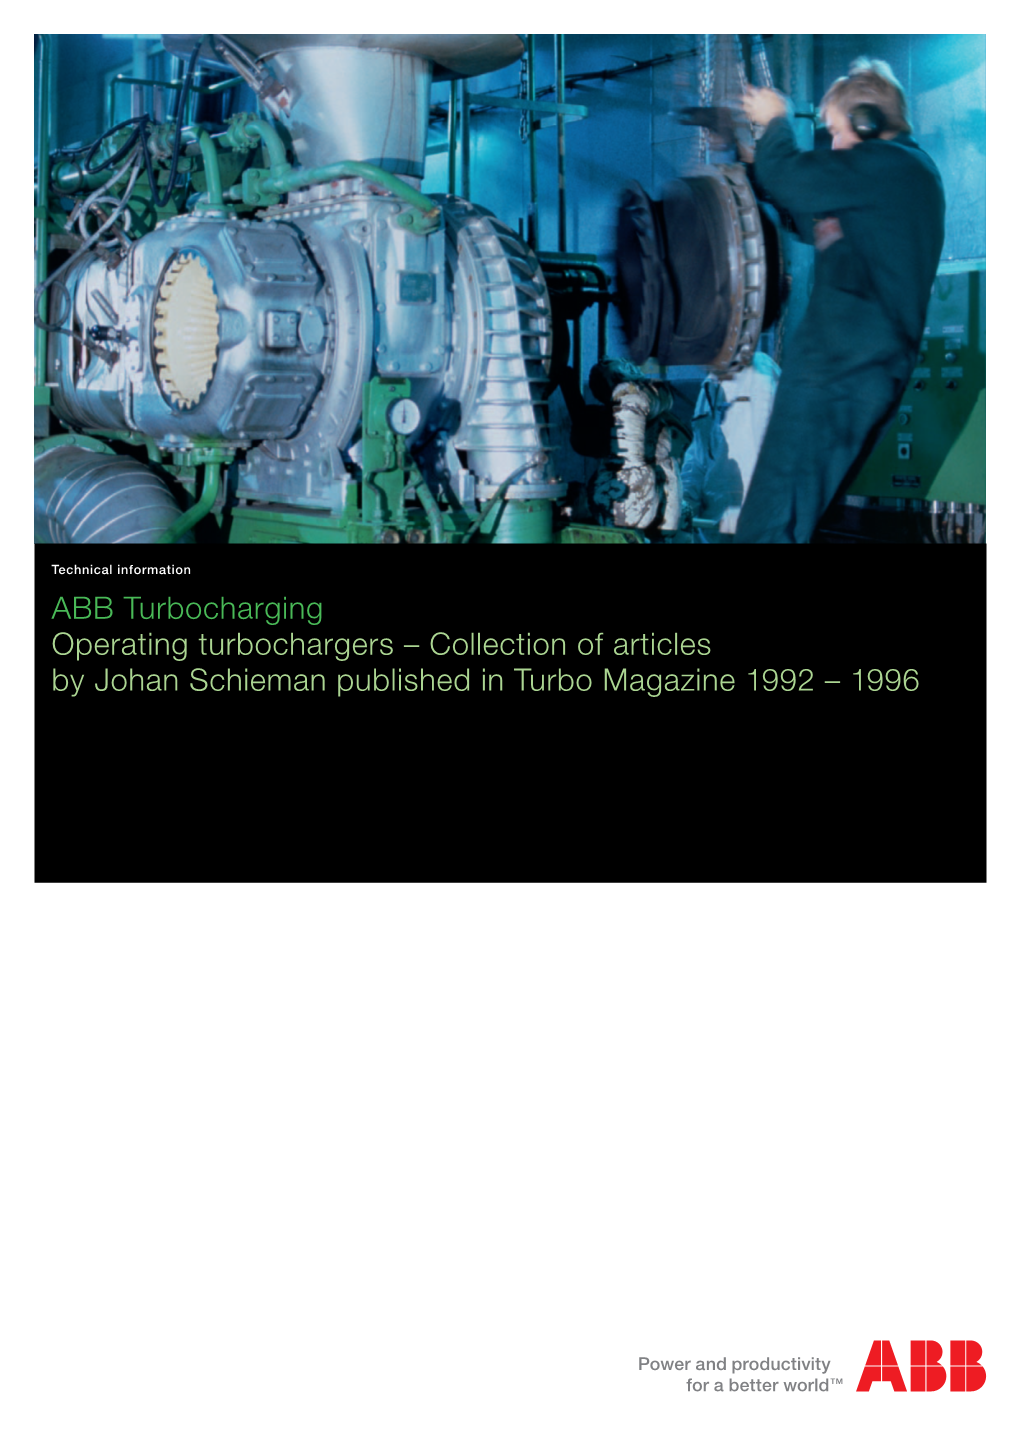 Operating Turbochargers – Collection of Articles by Johan Schieman Published in Turbo Magazine 1992 – 1996 Contents